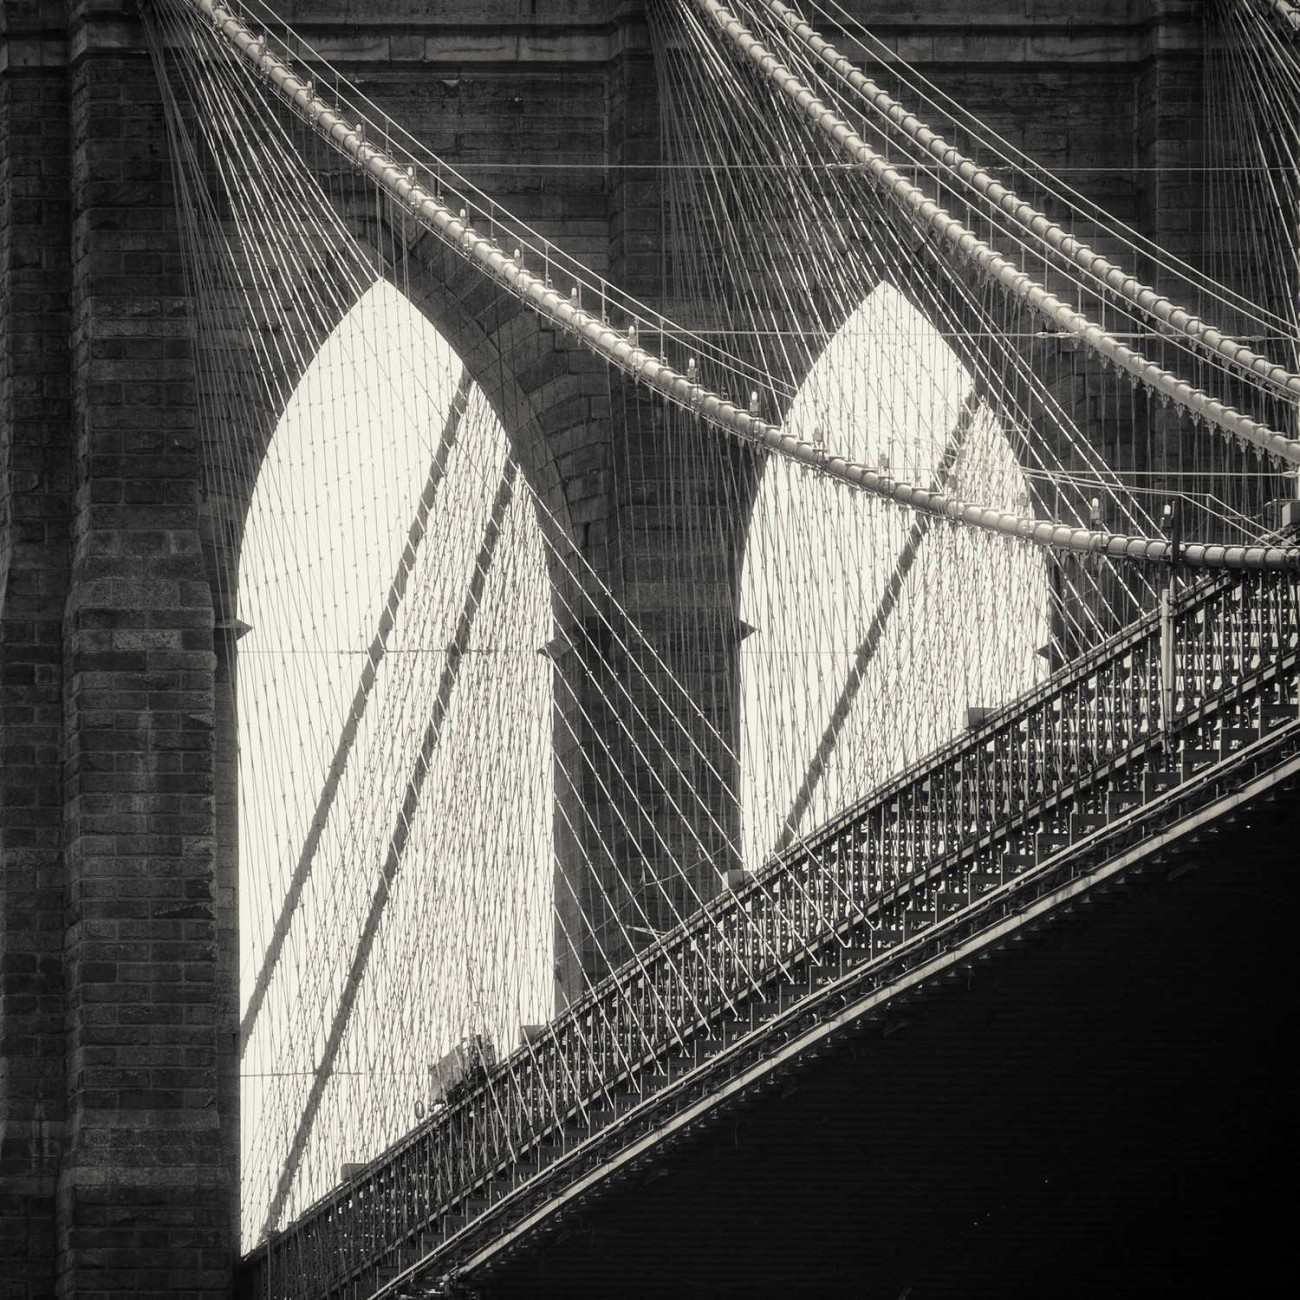 Brooklyn Bridge and cables, New York, 2013